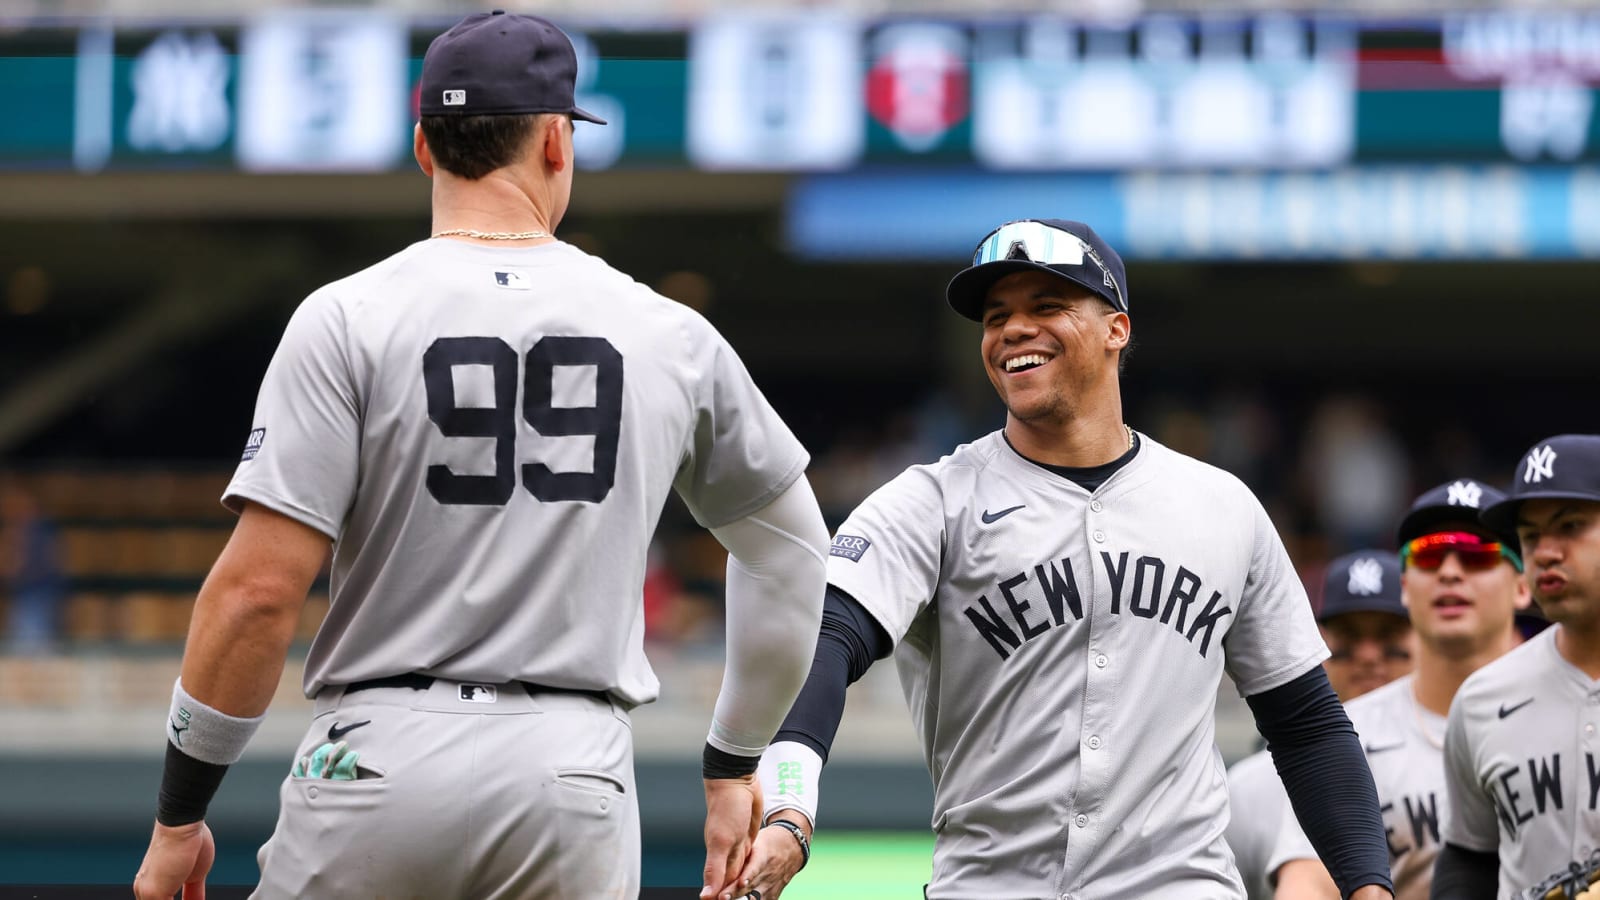 The Yankees will likely face a $500 million question next off-season